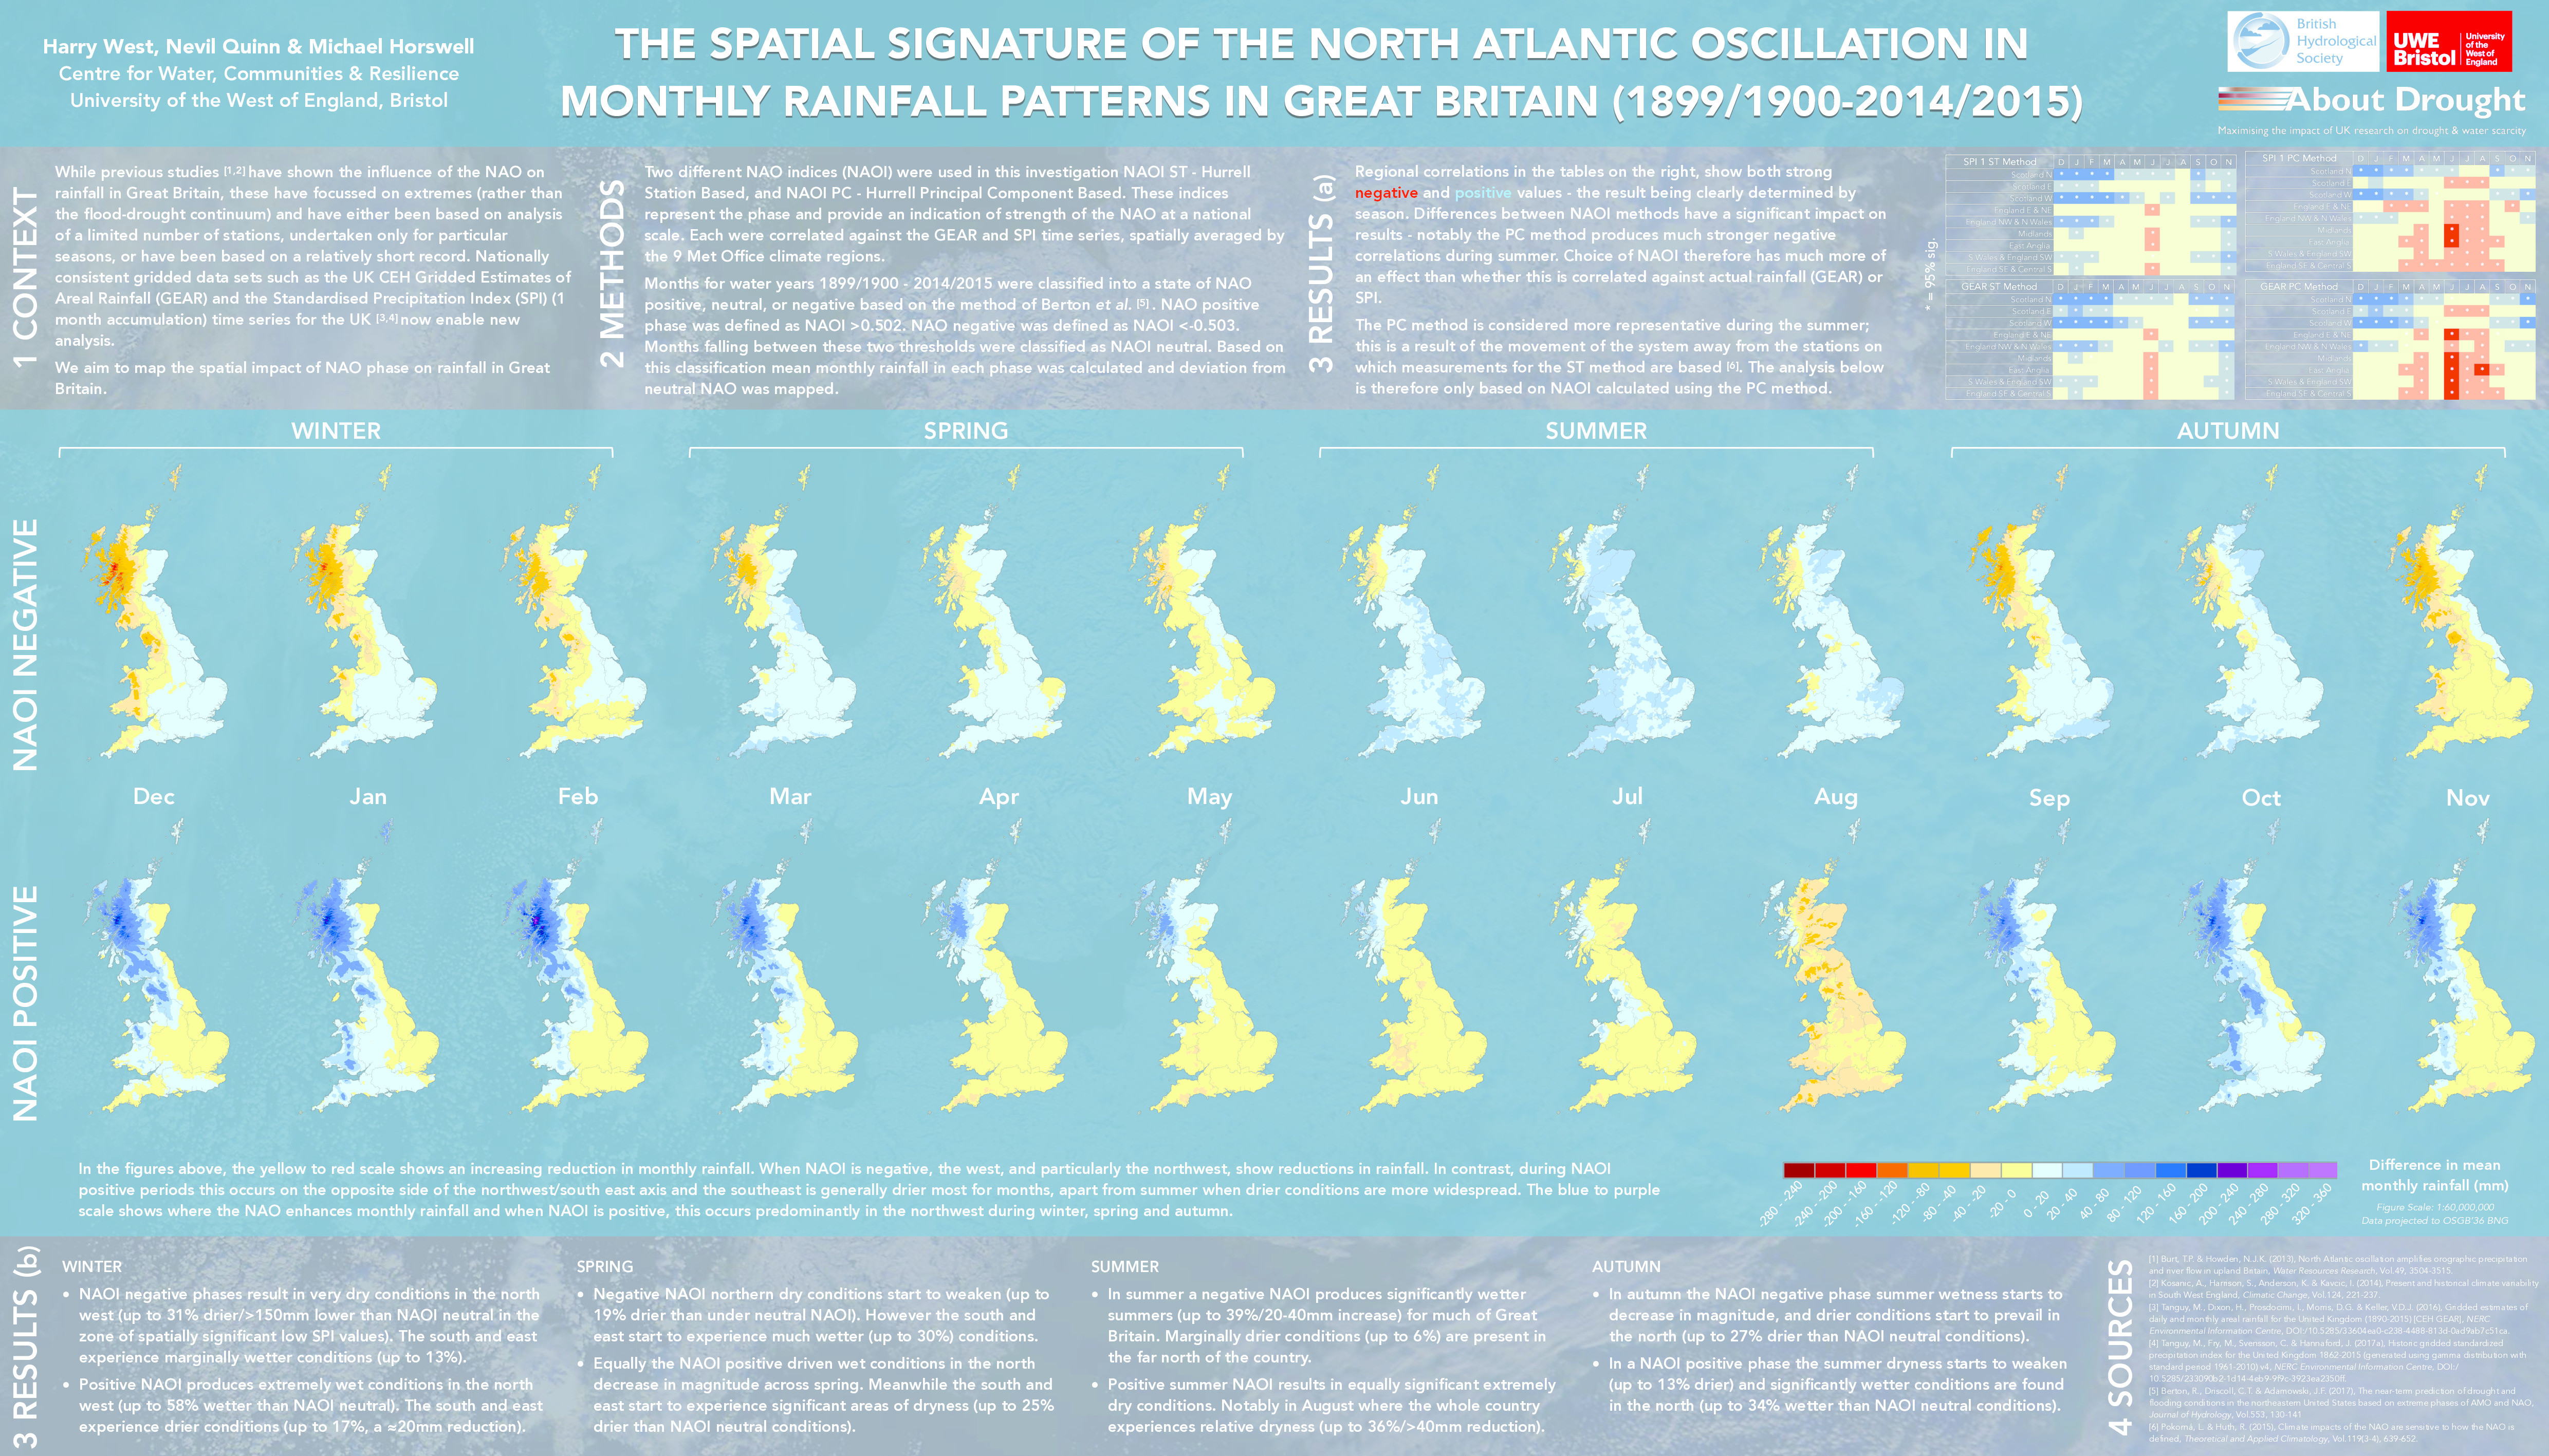 The spatial signature of the North Atlantic Oscillation in monthly rainfall patterns in Great Britain (1899/1900-2014/2015) Thumbnail